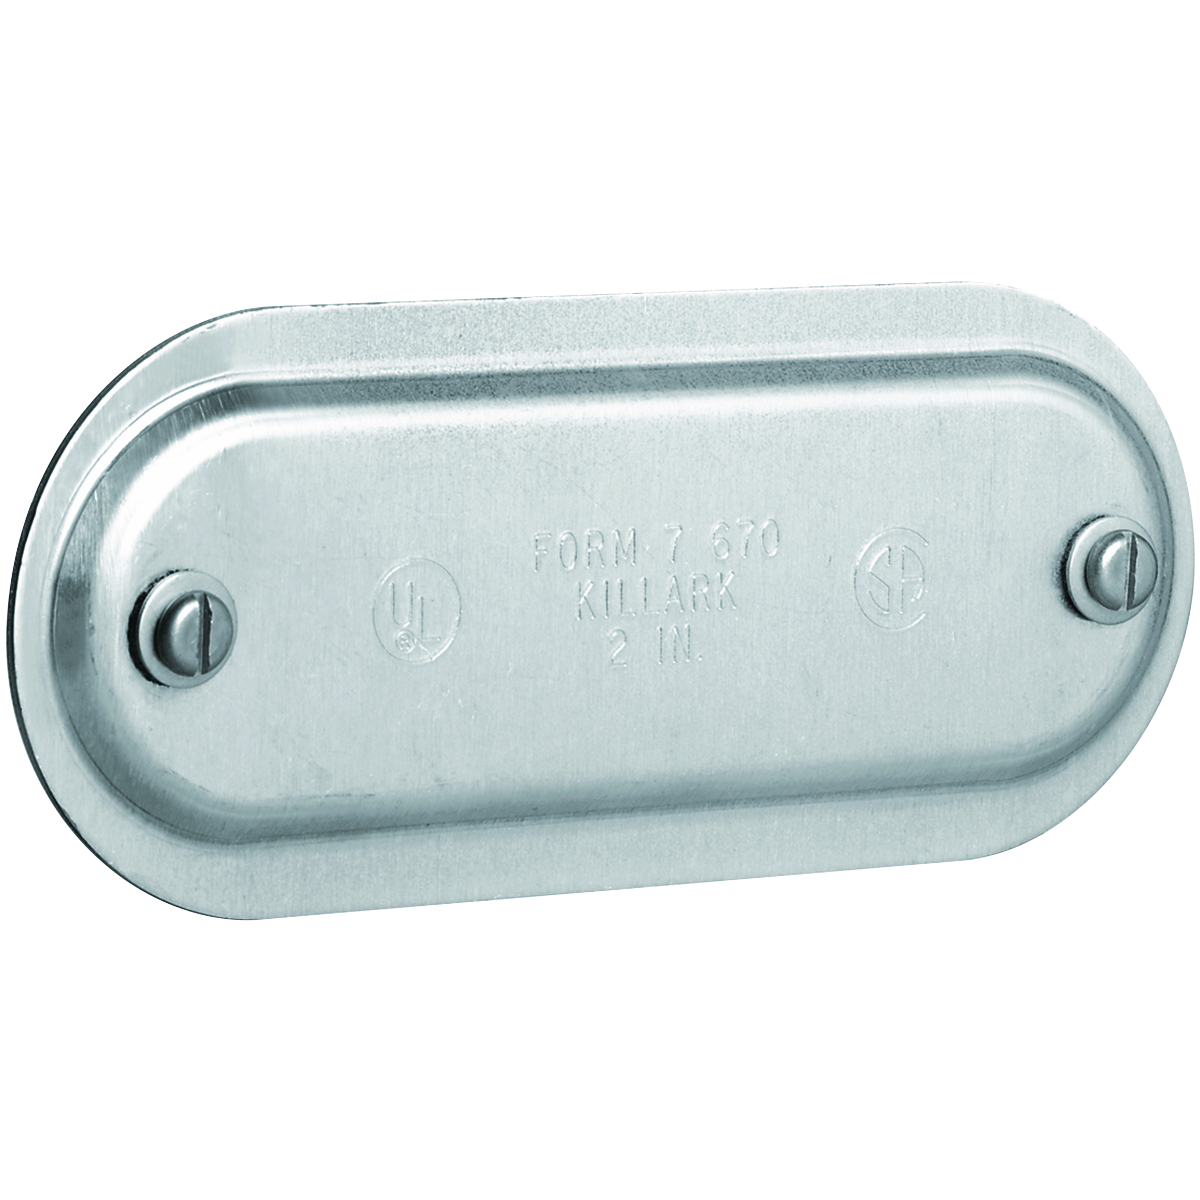 DURALOY 7 SERIES - STAMPED STEEL CONDUIT BODY COVER - HUB SIZE 3-1/2INCH